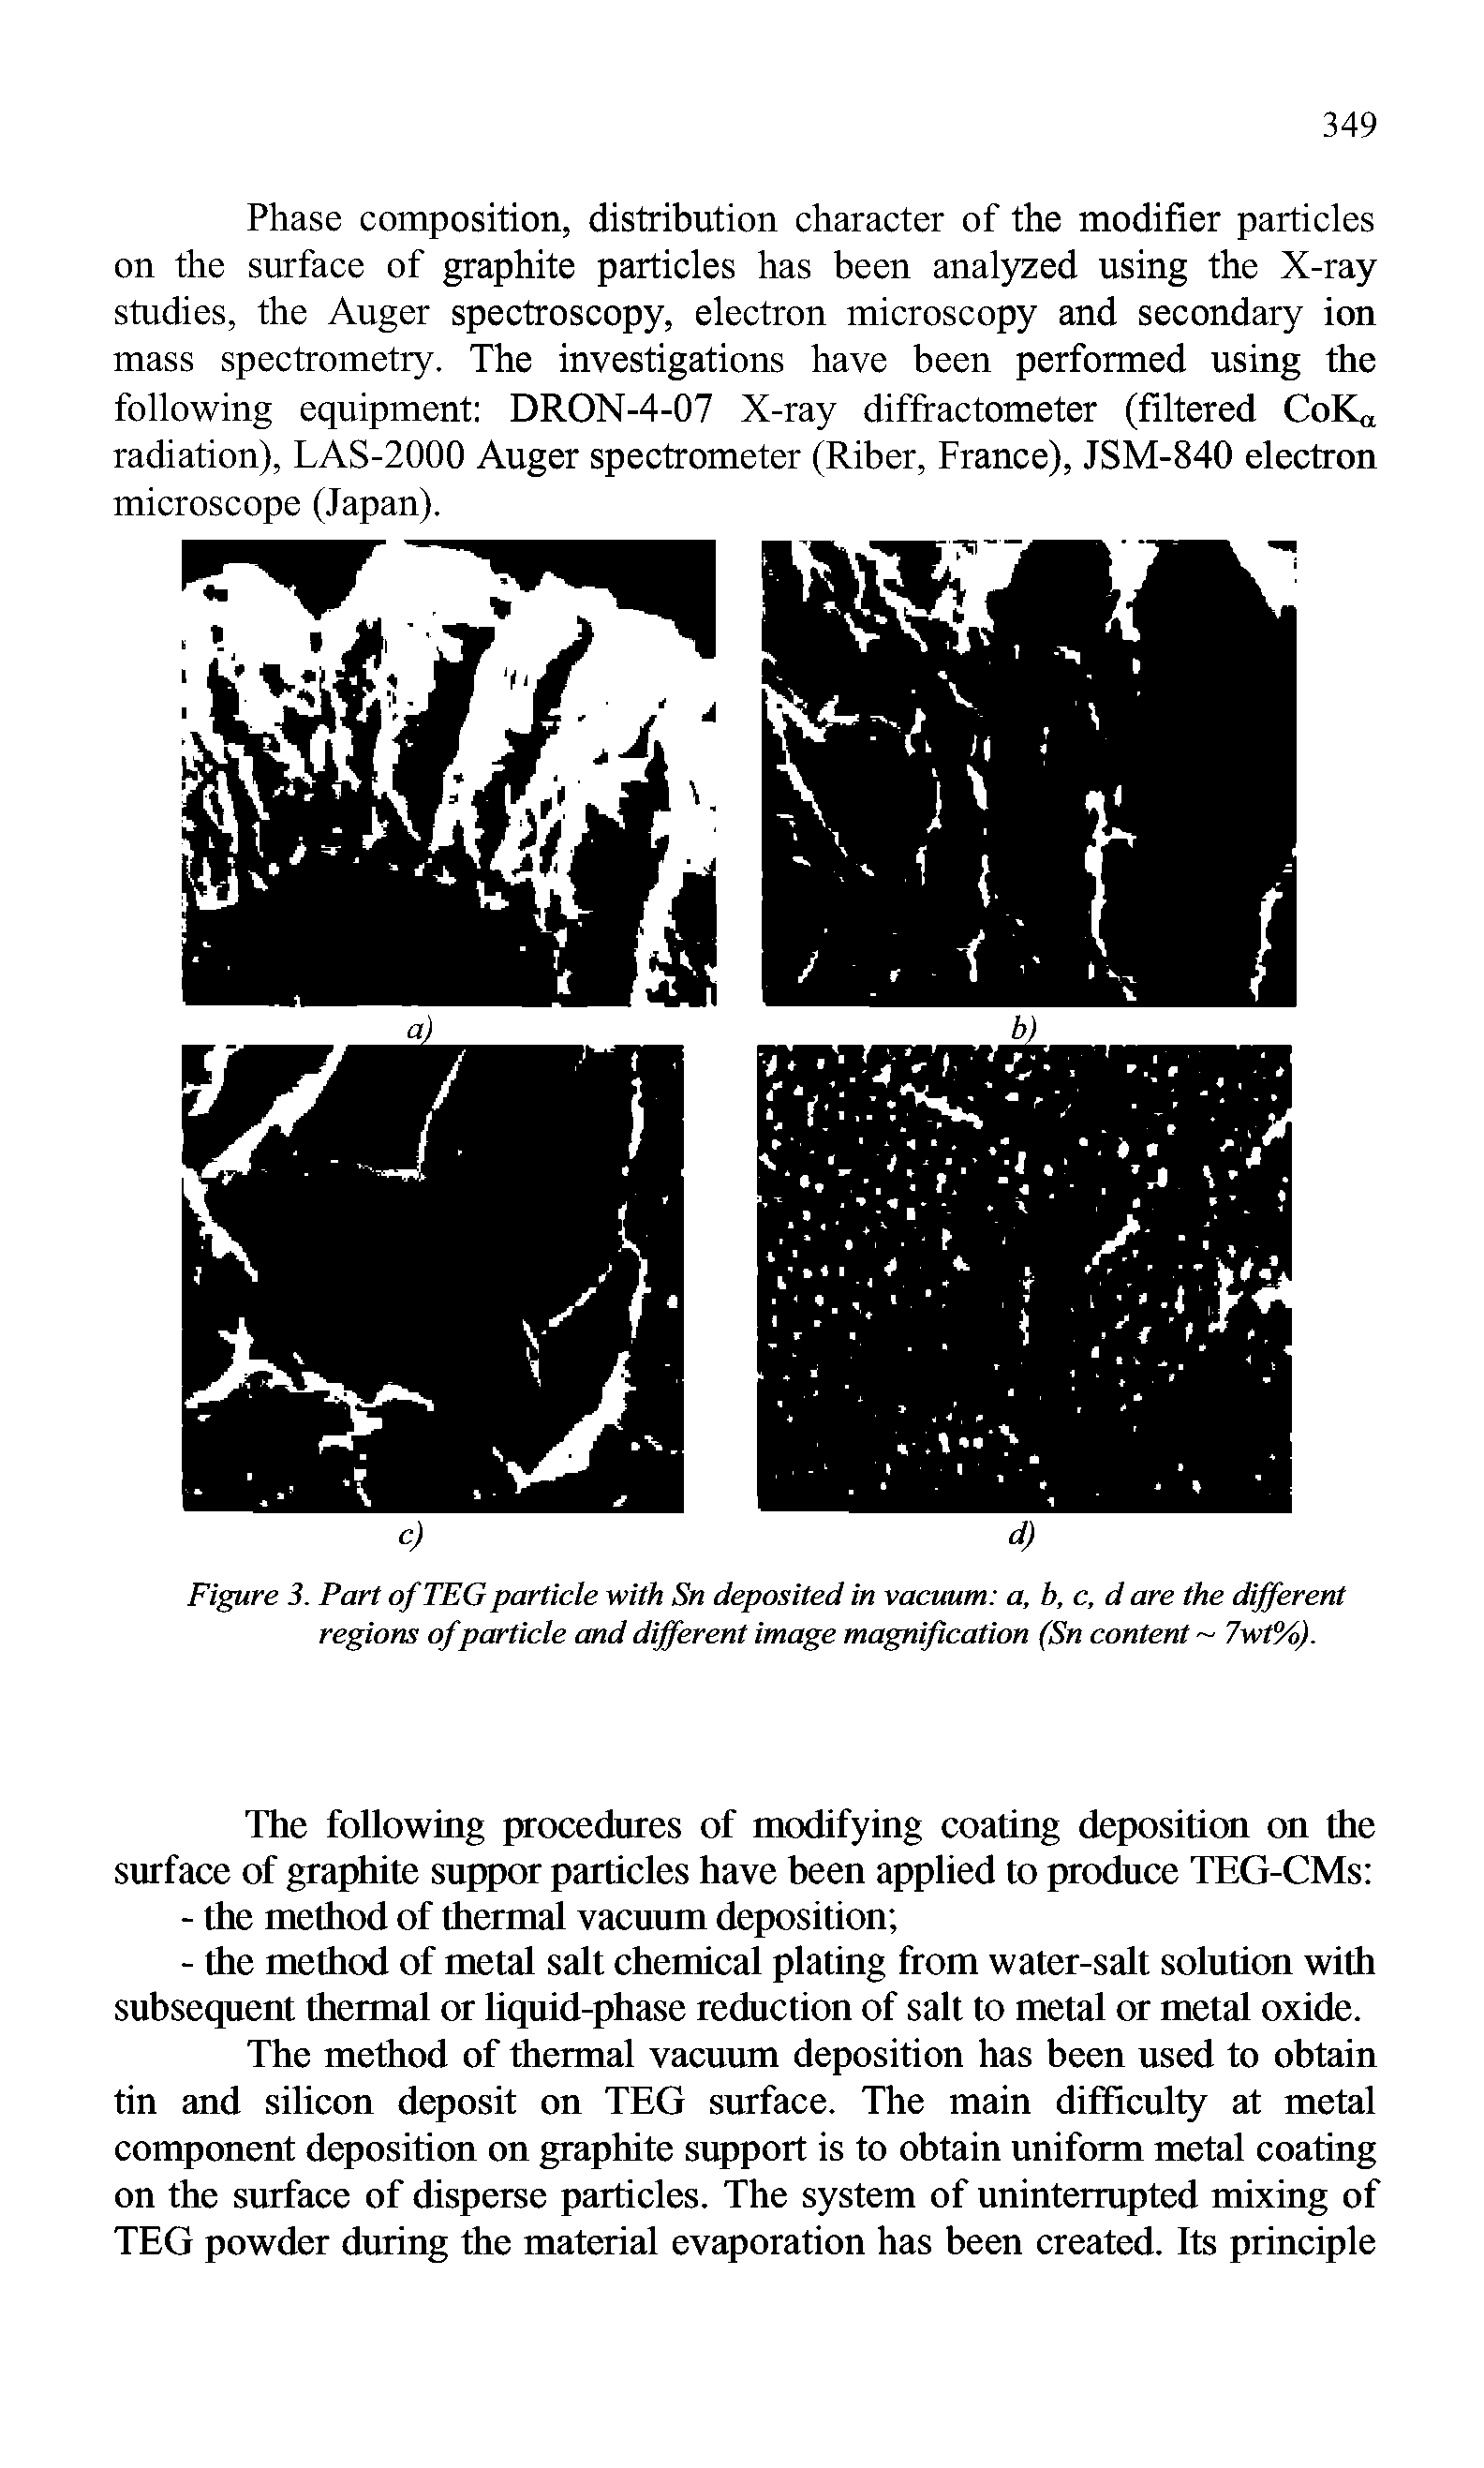 Figure 3. Part of TEG particle with Sn deposited in vacuum a, b, c, d are the different regions of particle and different image magnification (Sn content 7wt%).